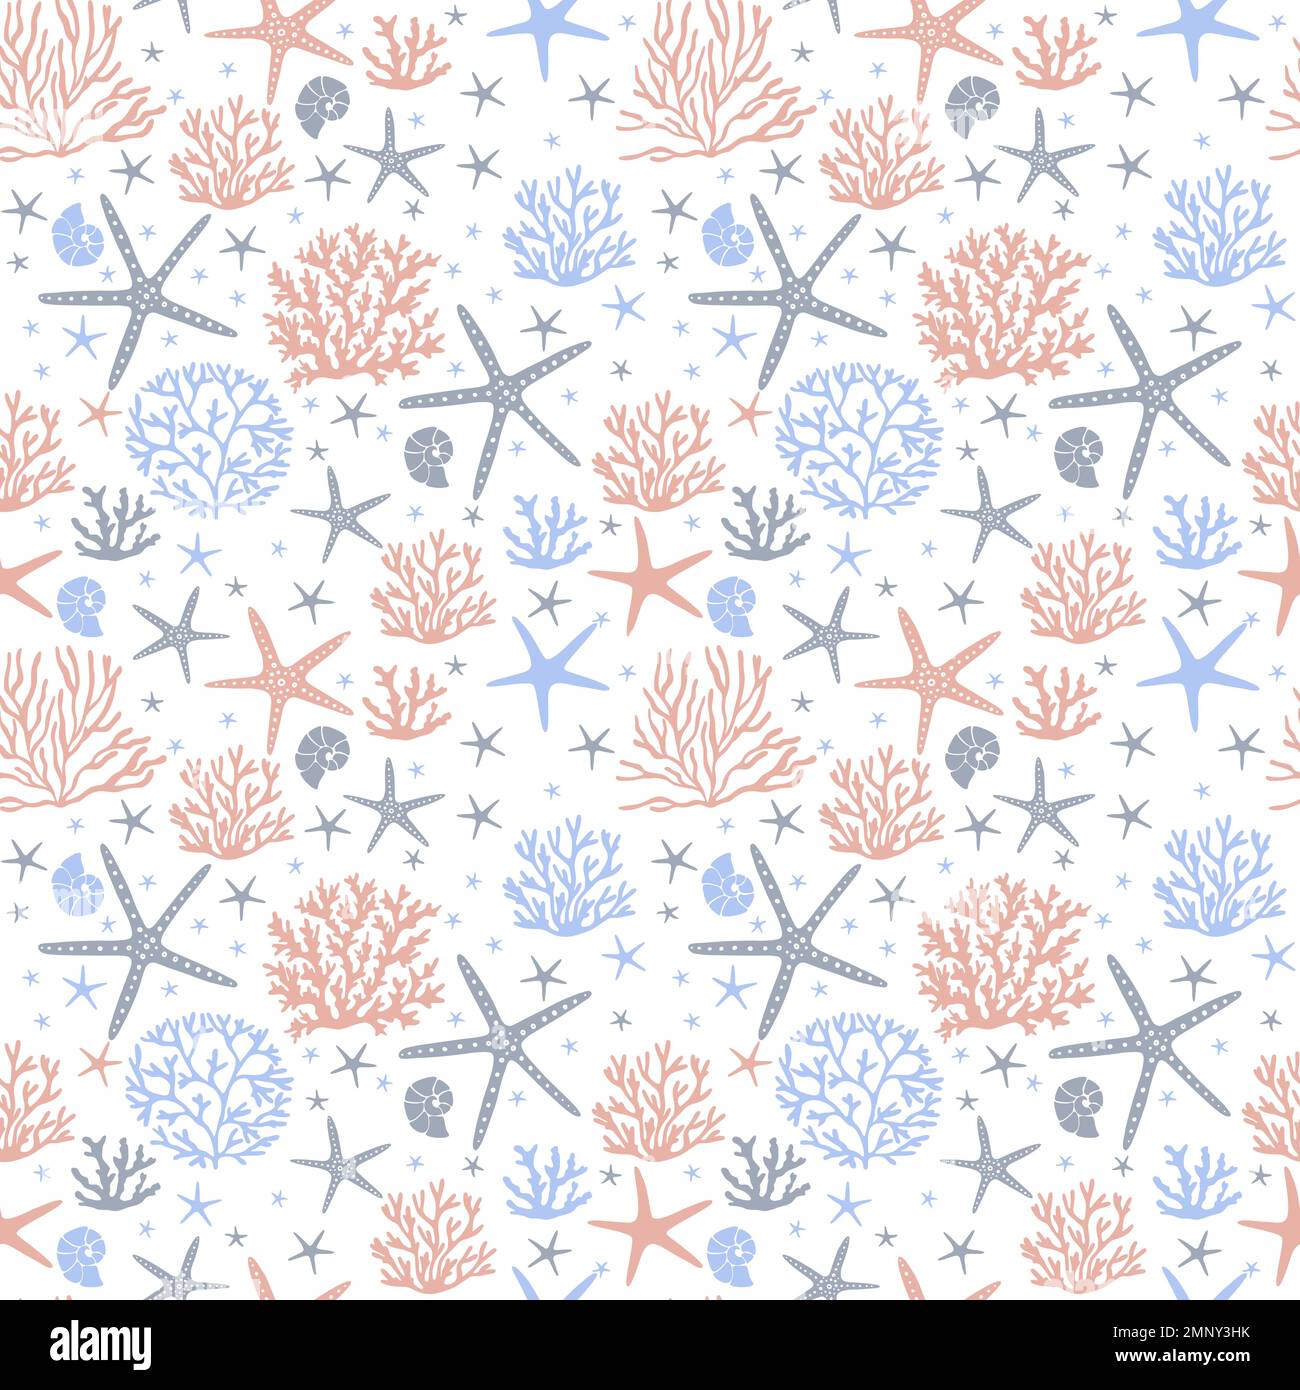 Sea stars and coral vector seamless pattern Stock Vector